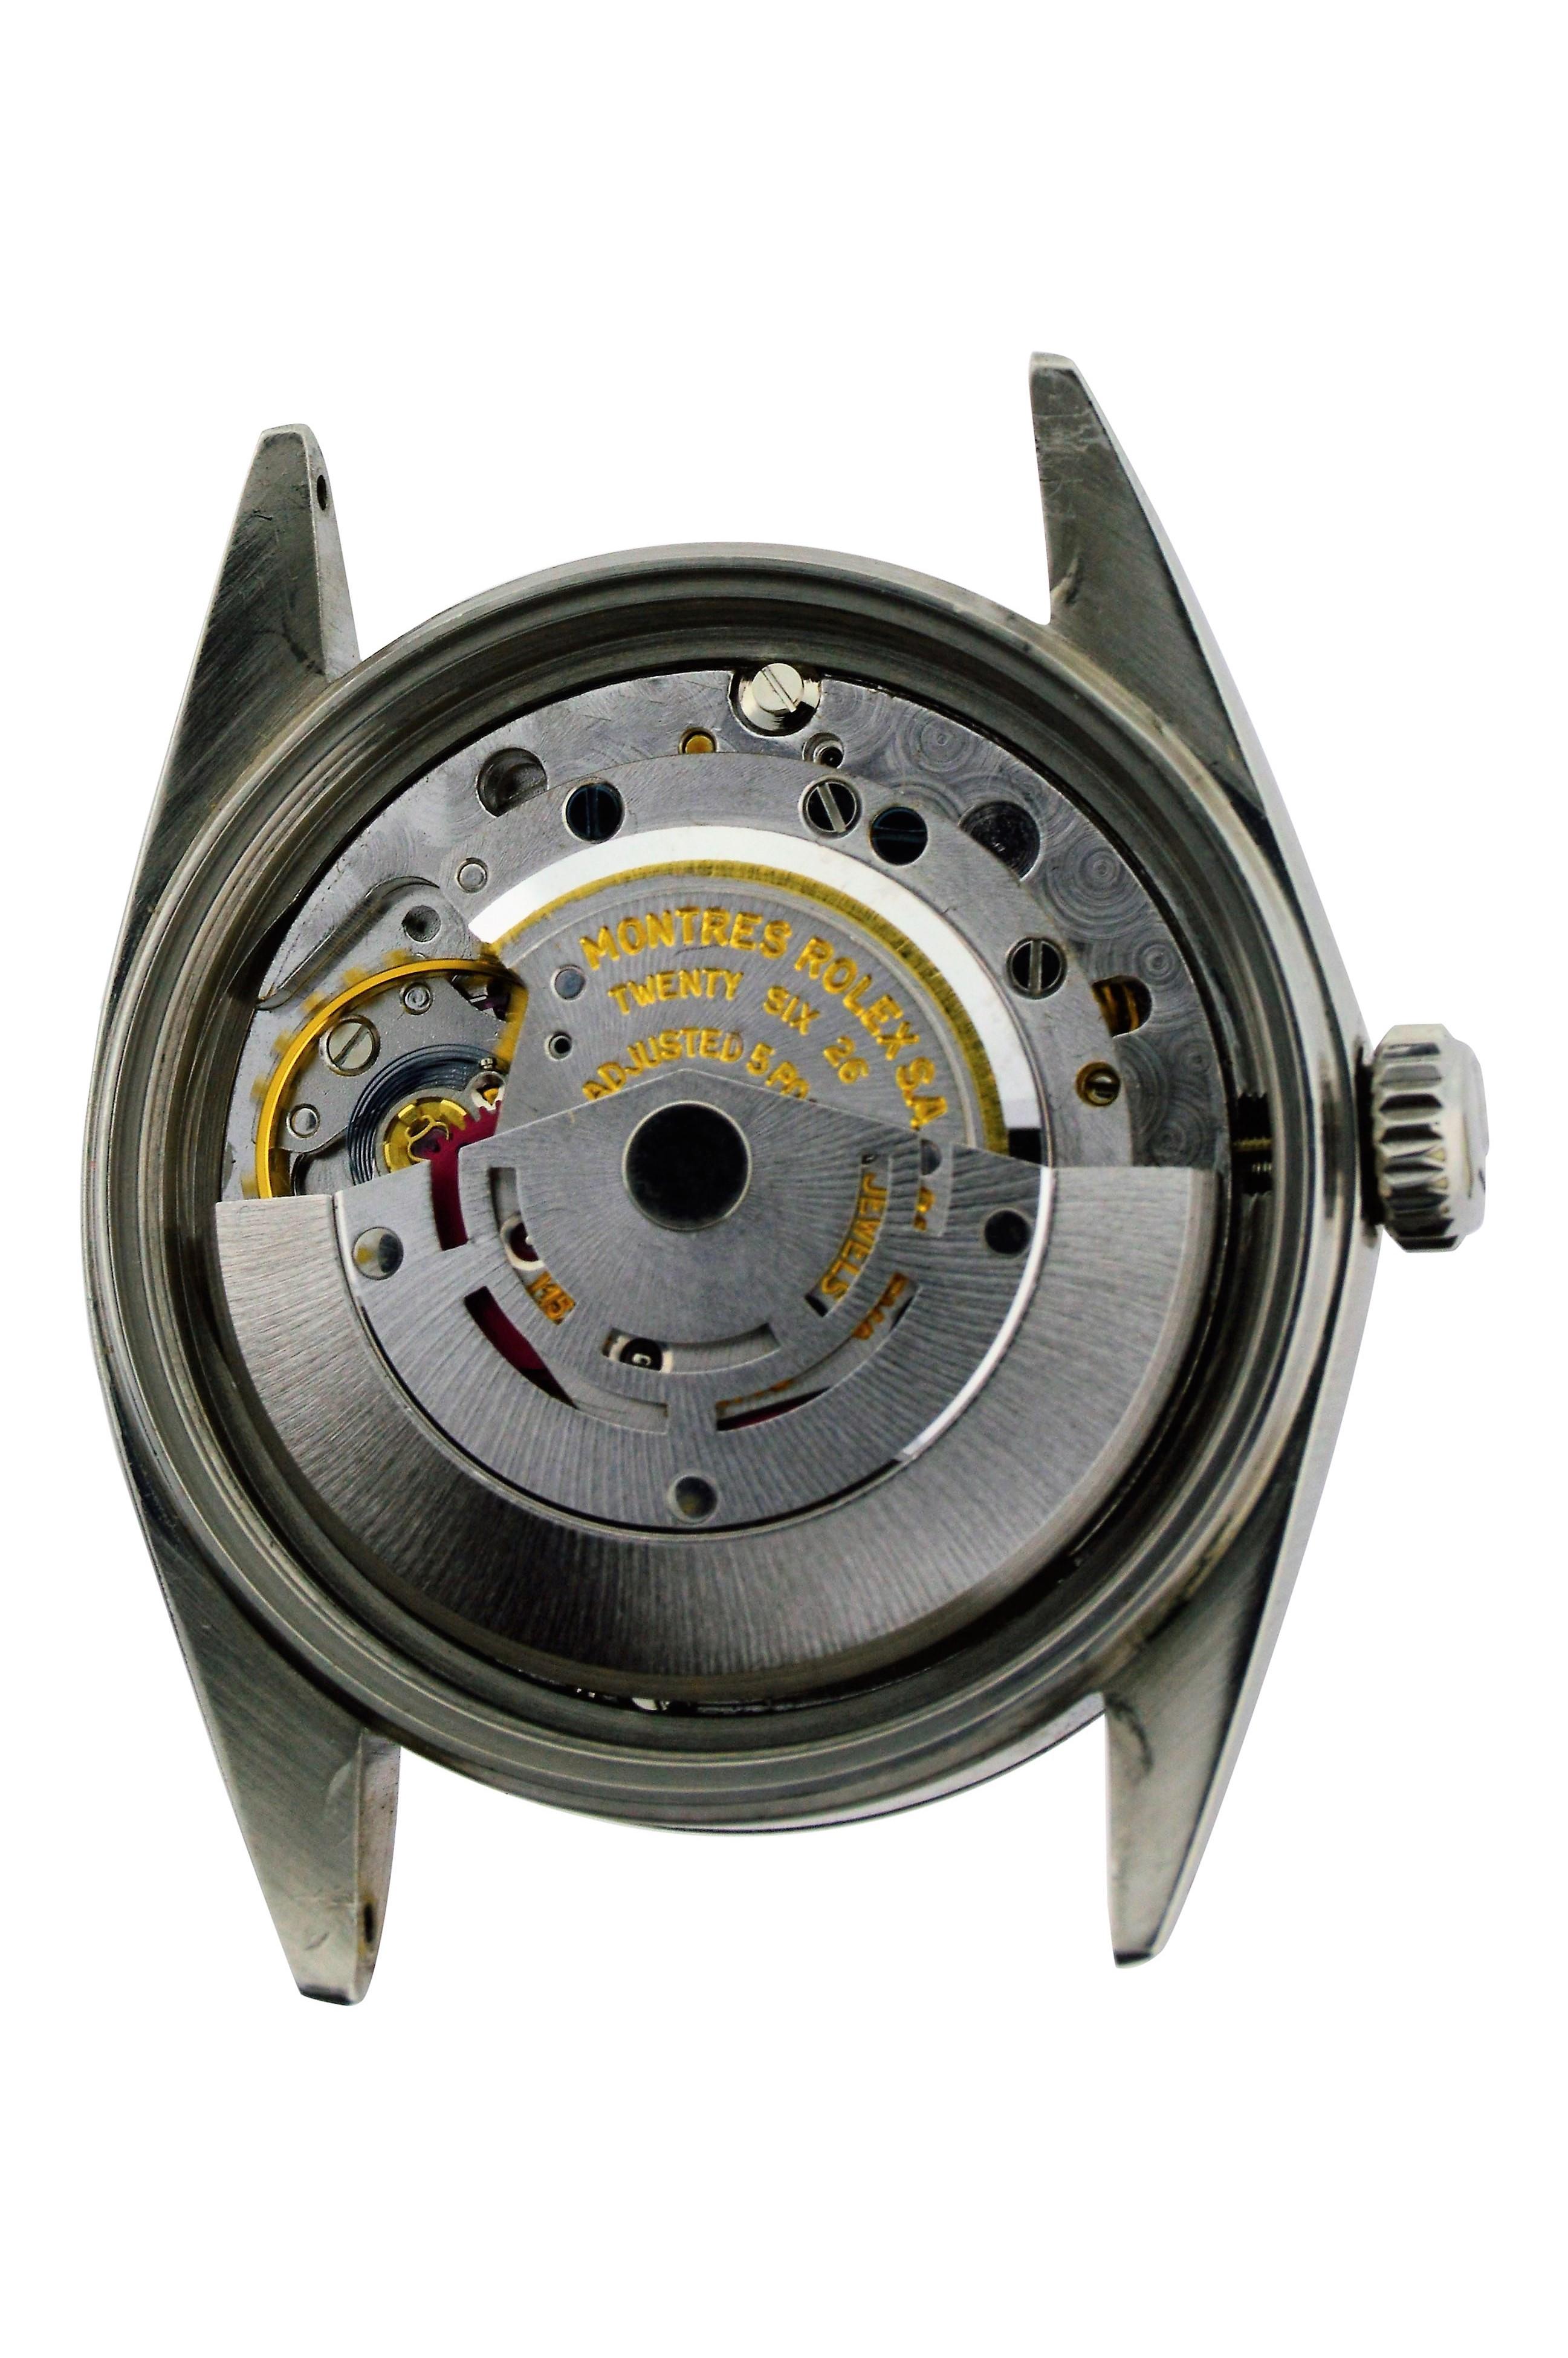 Rolex Steel Perpetual Oyster with Custom Dial from 1969 or 1970 5